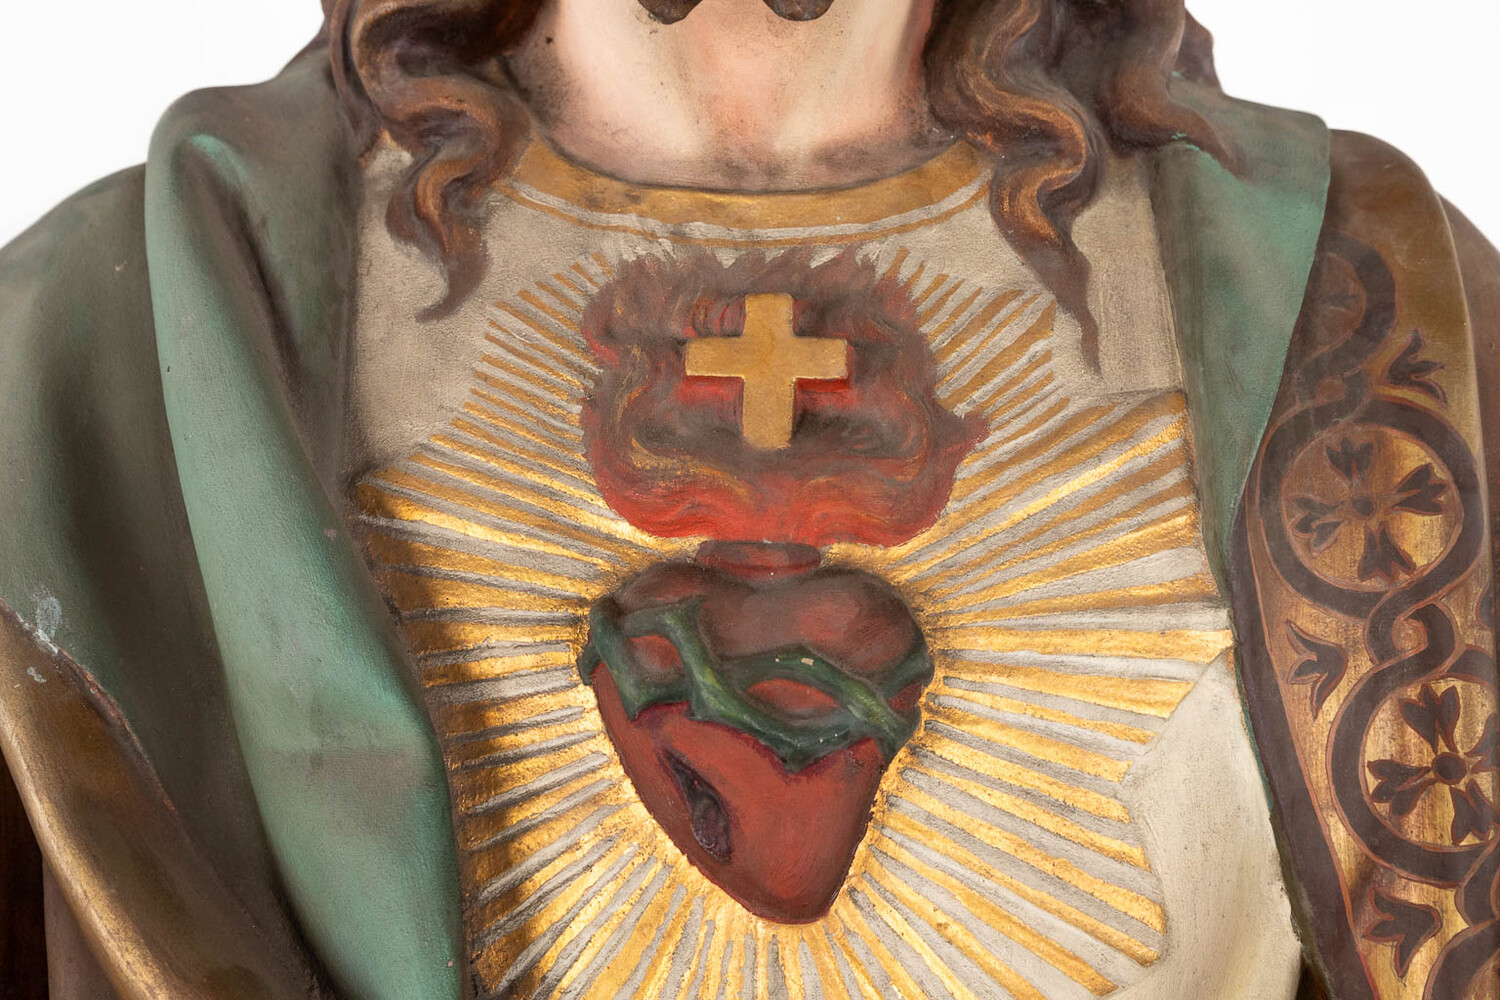 1 Gothic - Style More Than Life Size Sacred Heart Statue